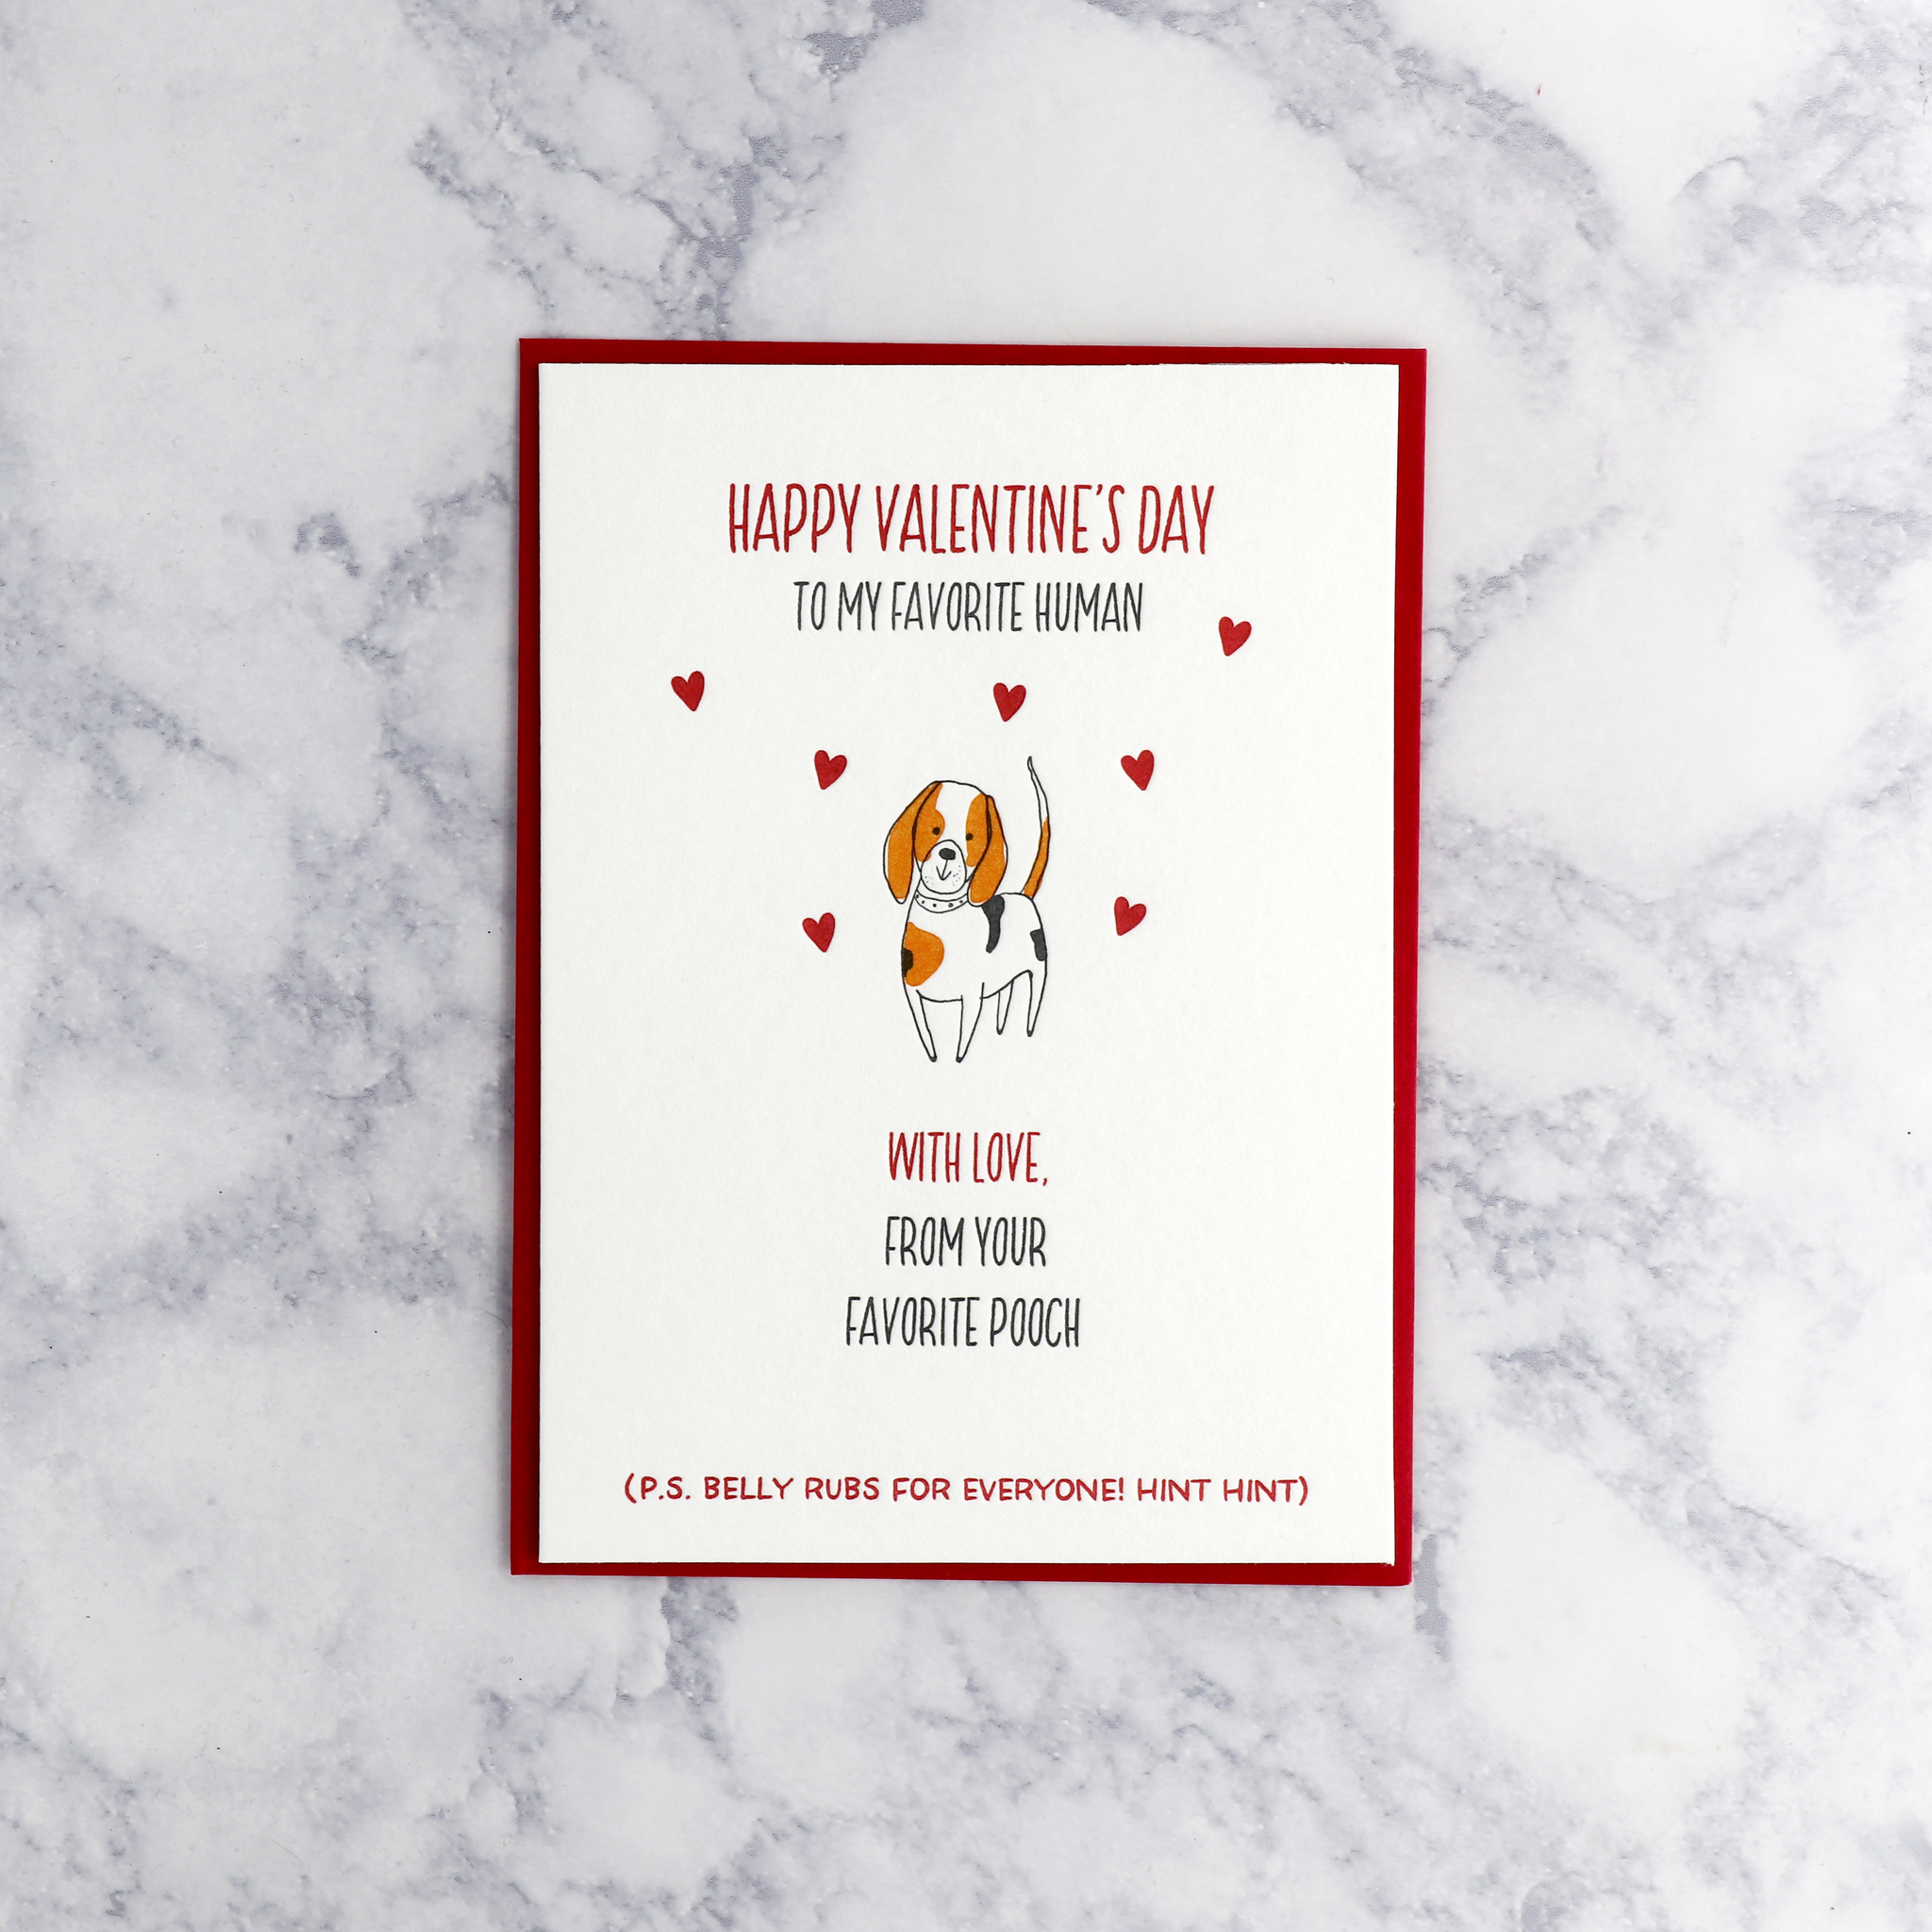 Letterpress "From Your Favorite Pooch" Valentine’s Day Card